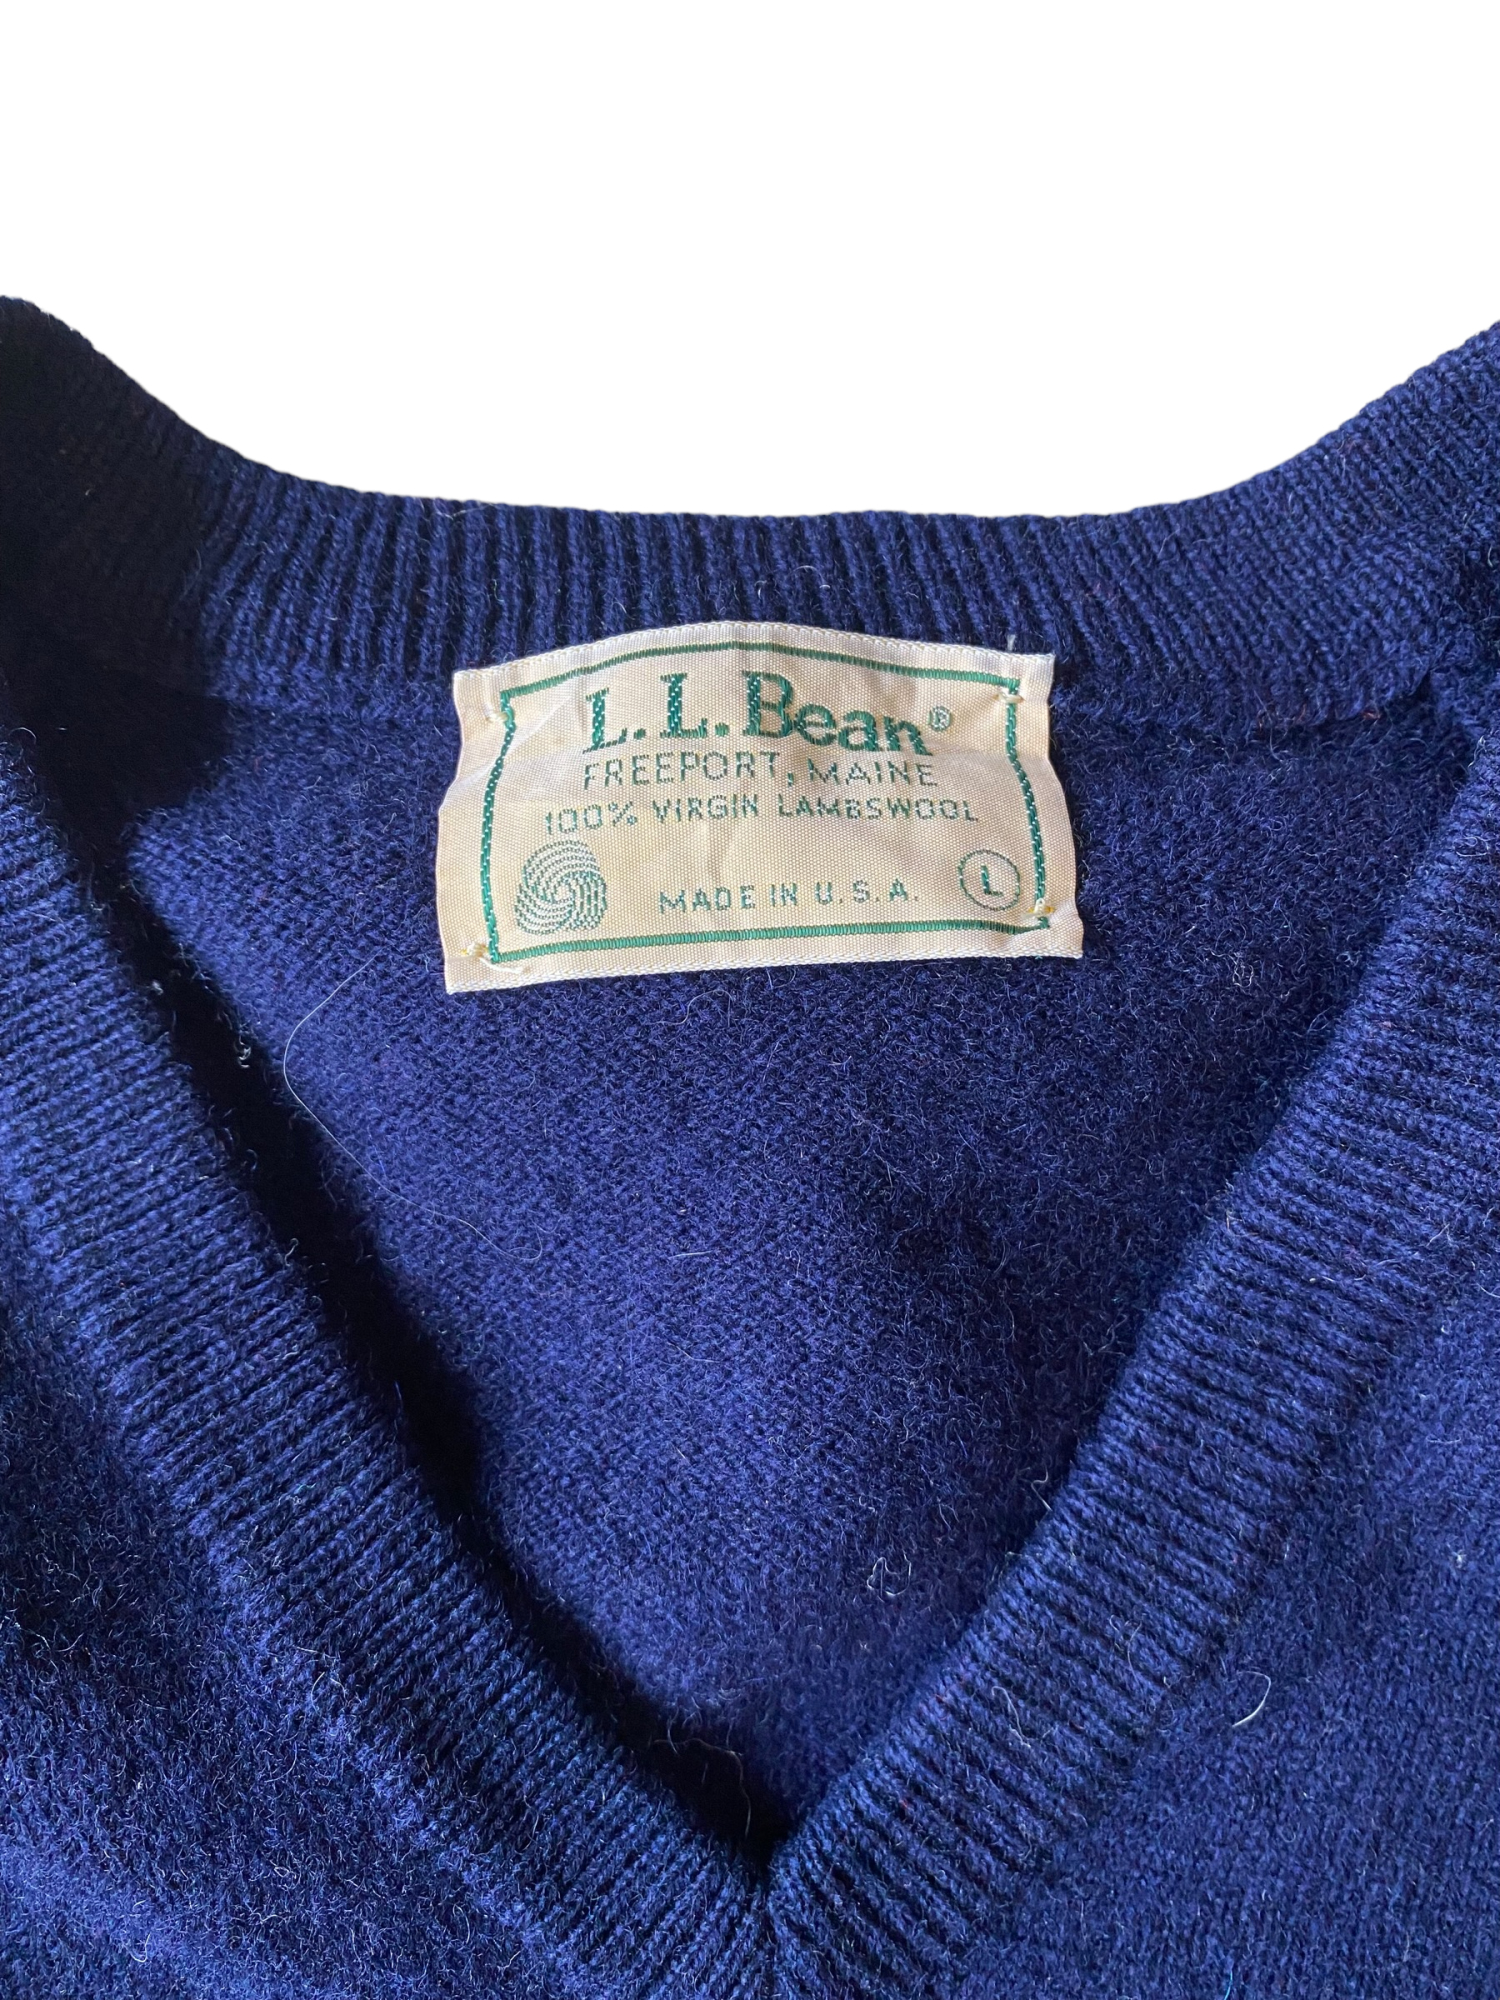 L.L.Bean made in USA knit vest